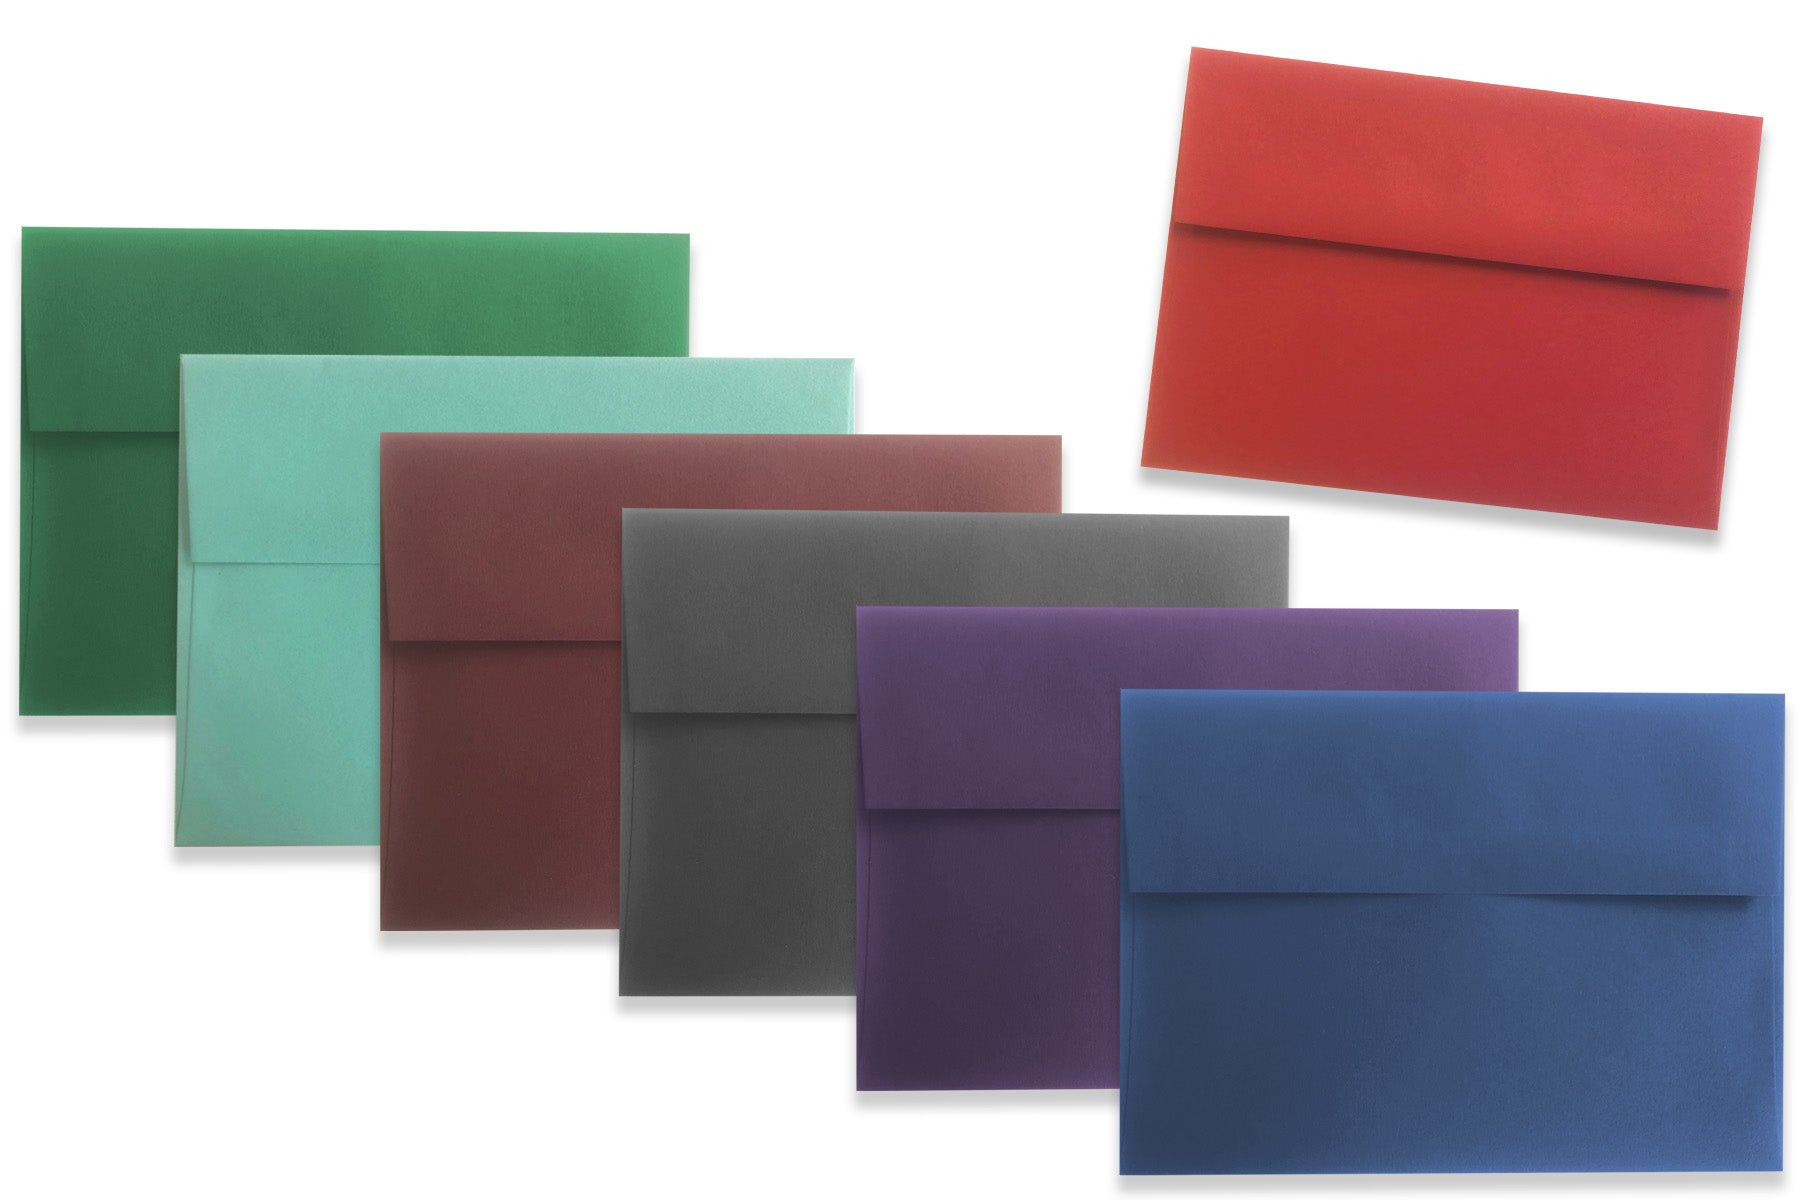 5x7 Envelopes for Invitations, 40-Pack A7 Envelopes for 5x7 Cards, Colored Invitation Envelopes, Purple, 5 1/4 x 7 1/4 Inches